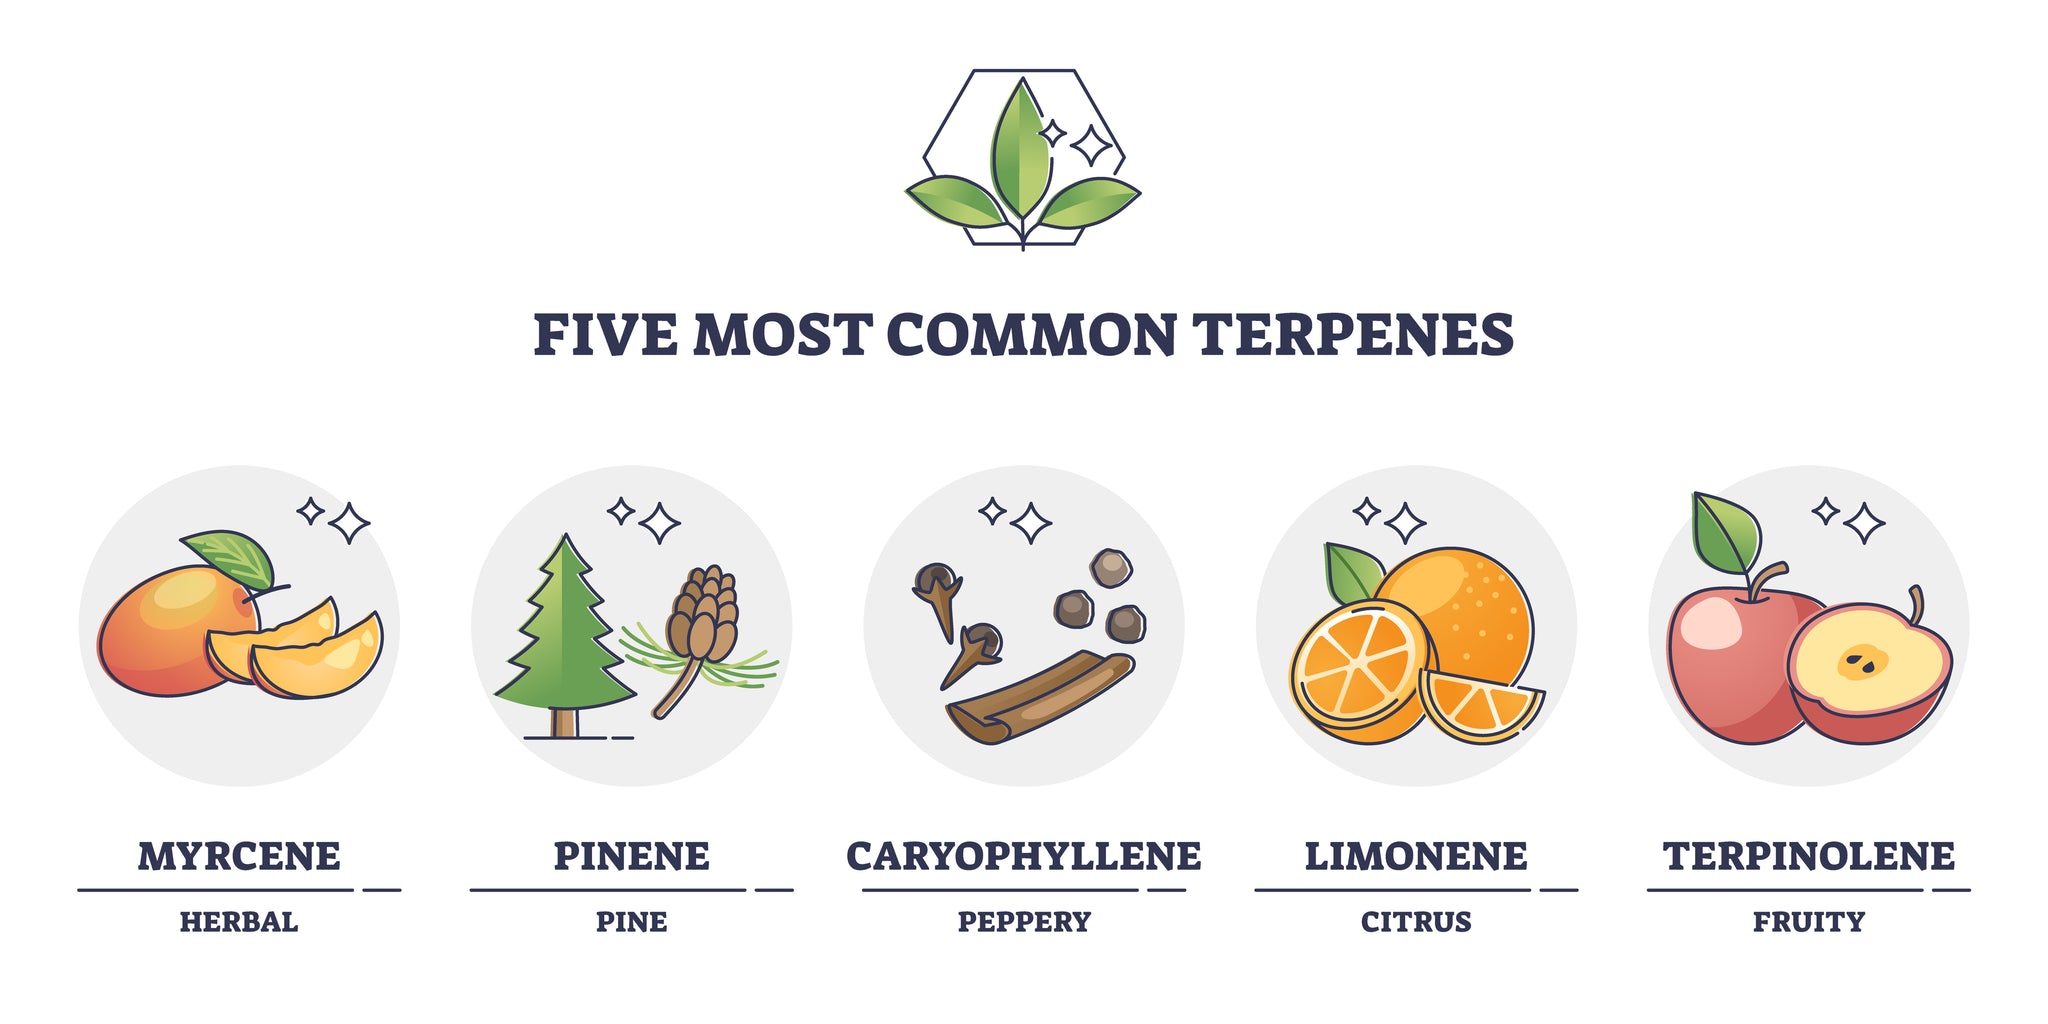 What Are Terpenes